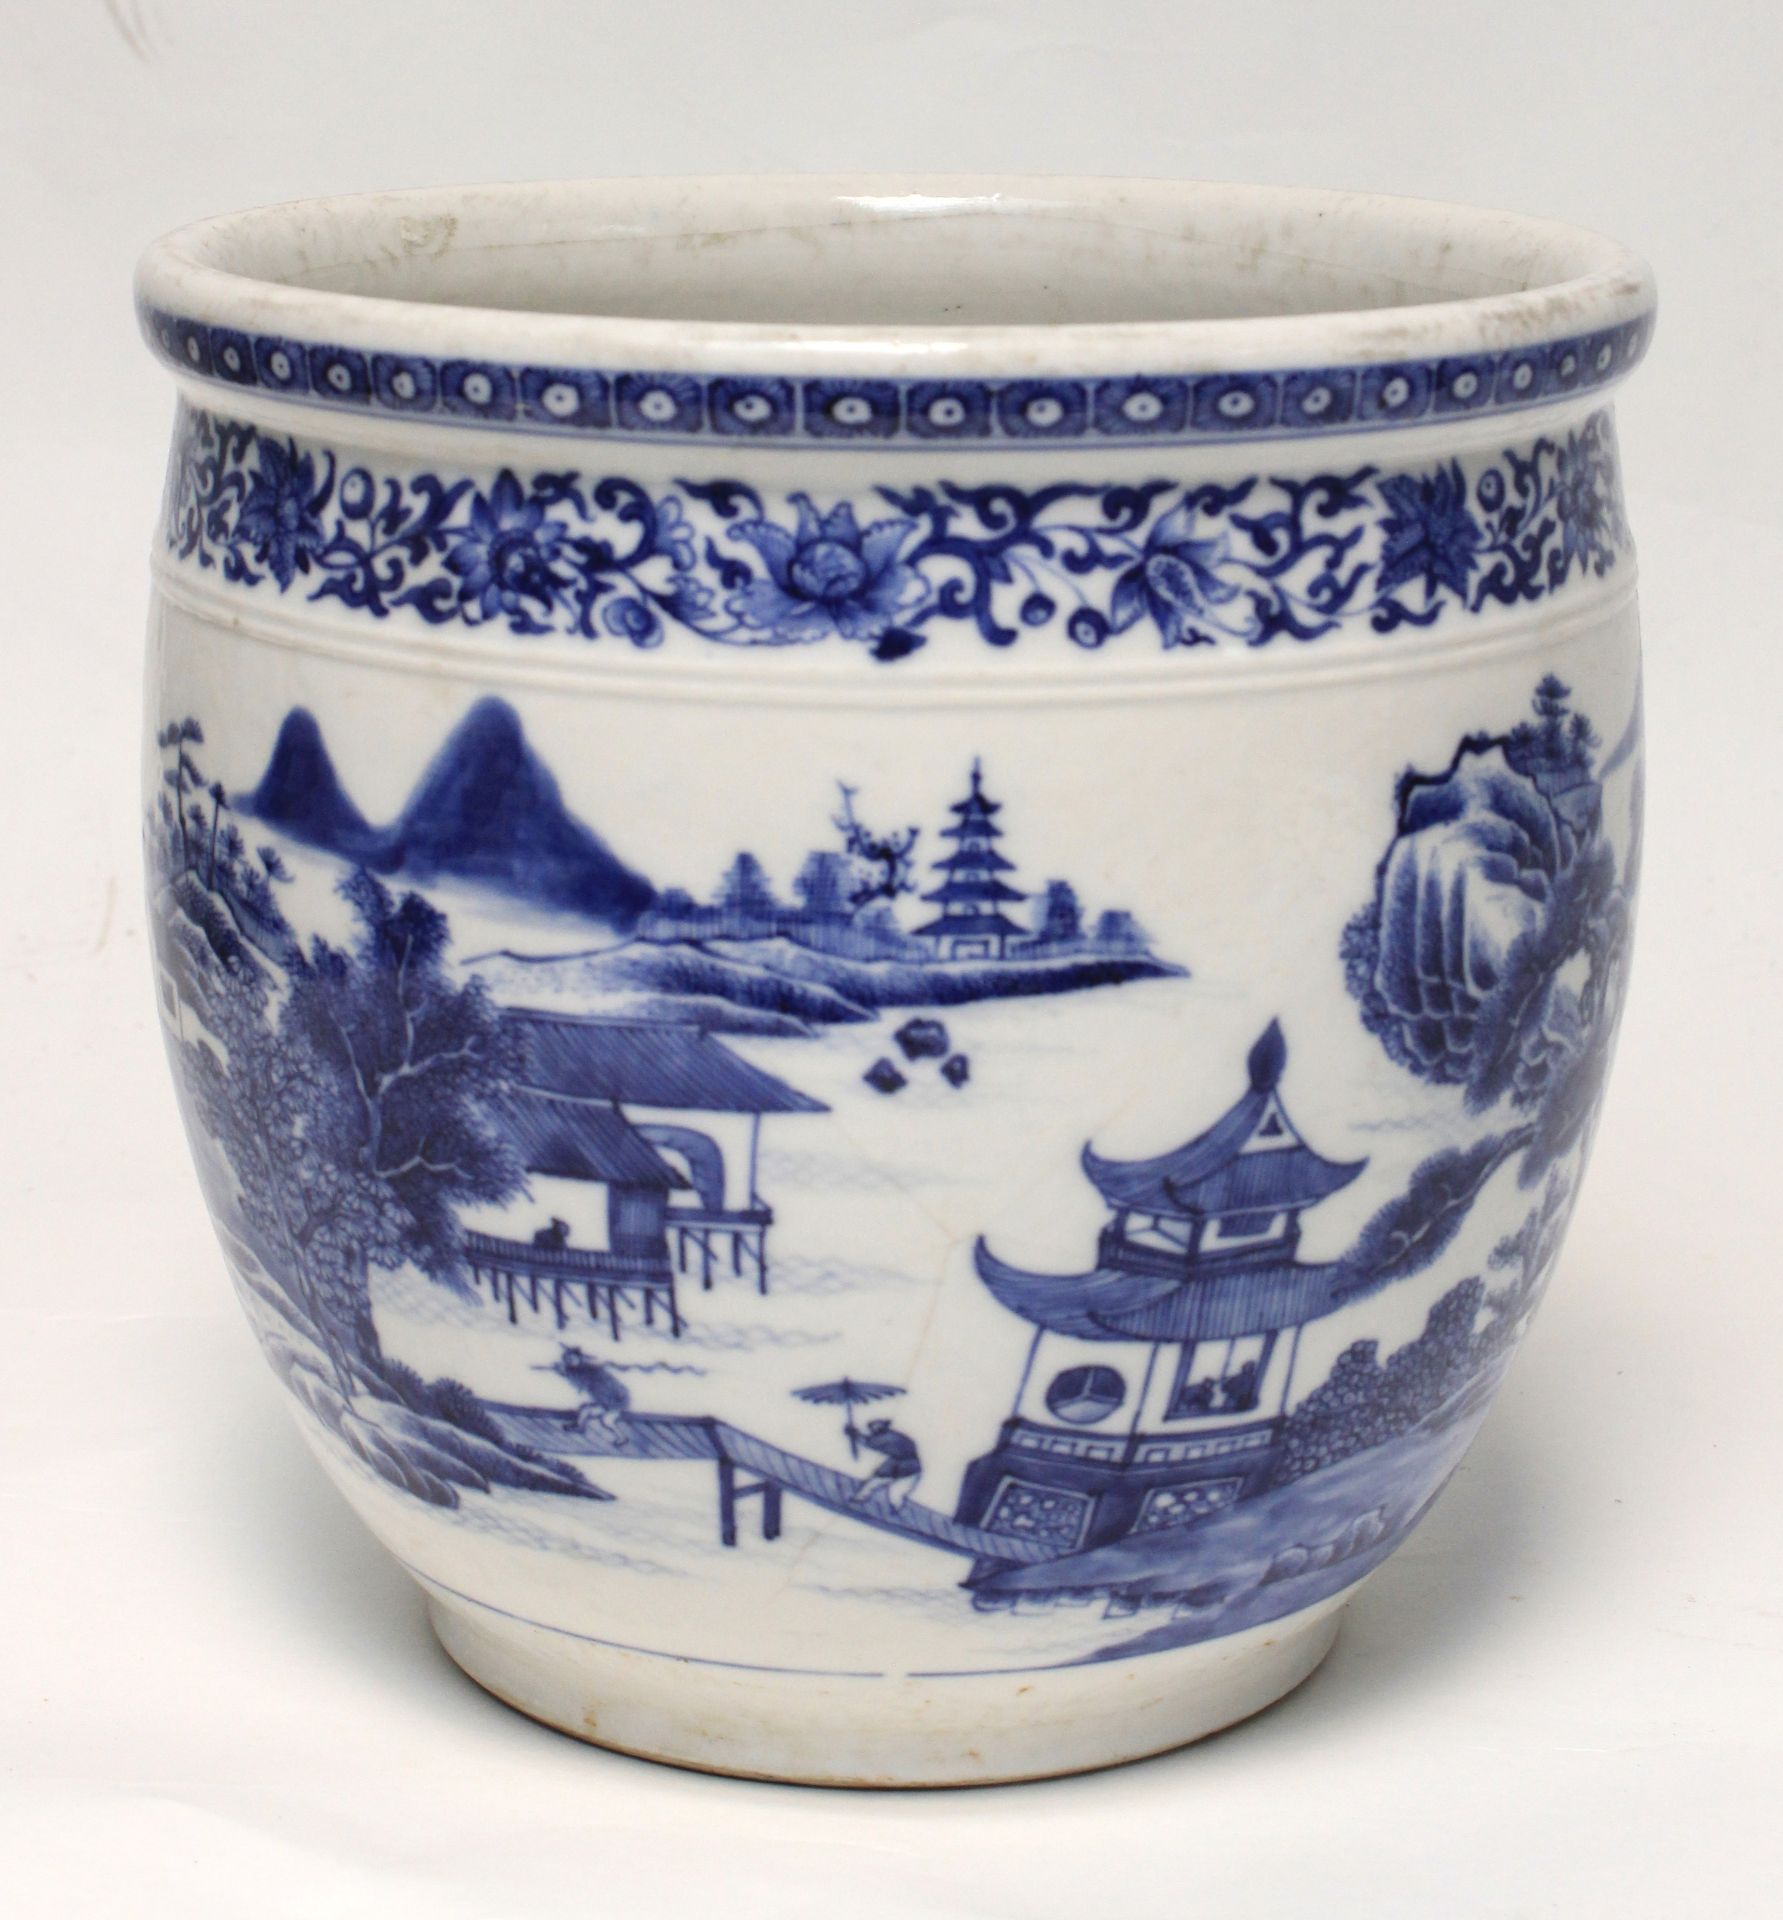 A late 18th century Chinese prob. Kangxi cache-pot in white and blue porcelain - Image 2 of 5